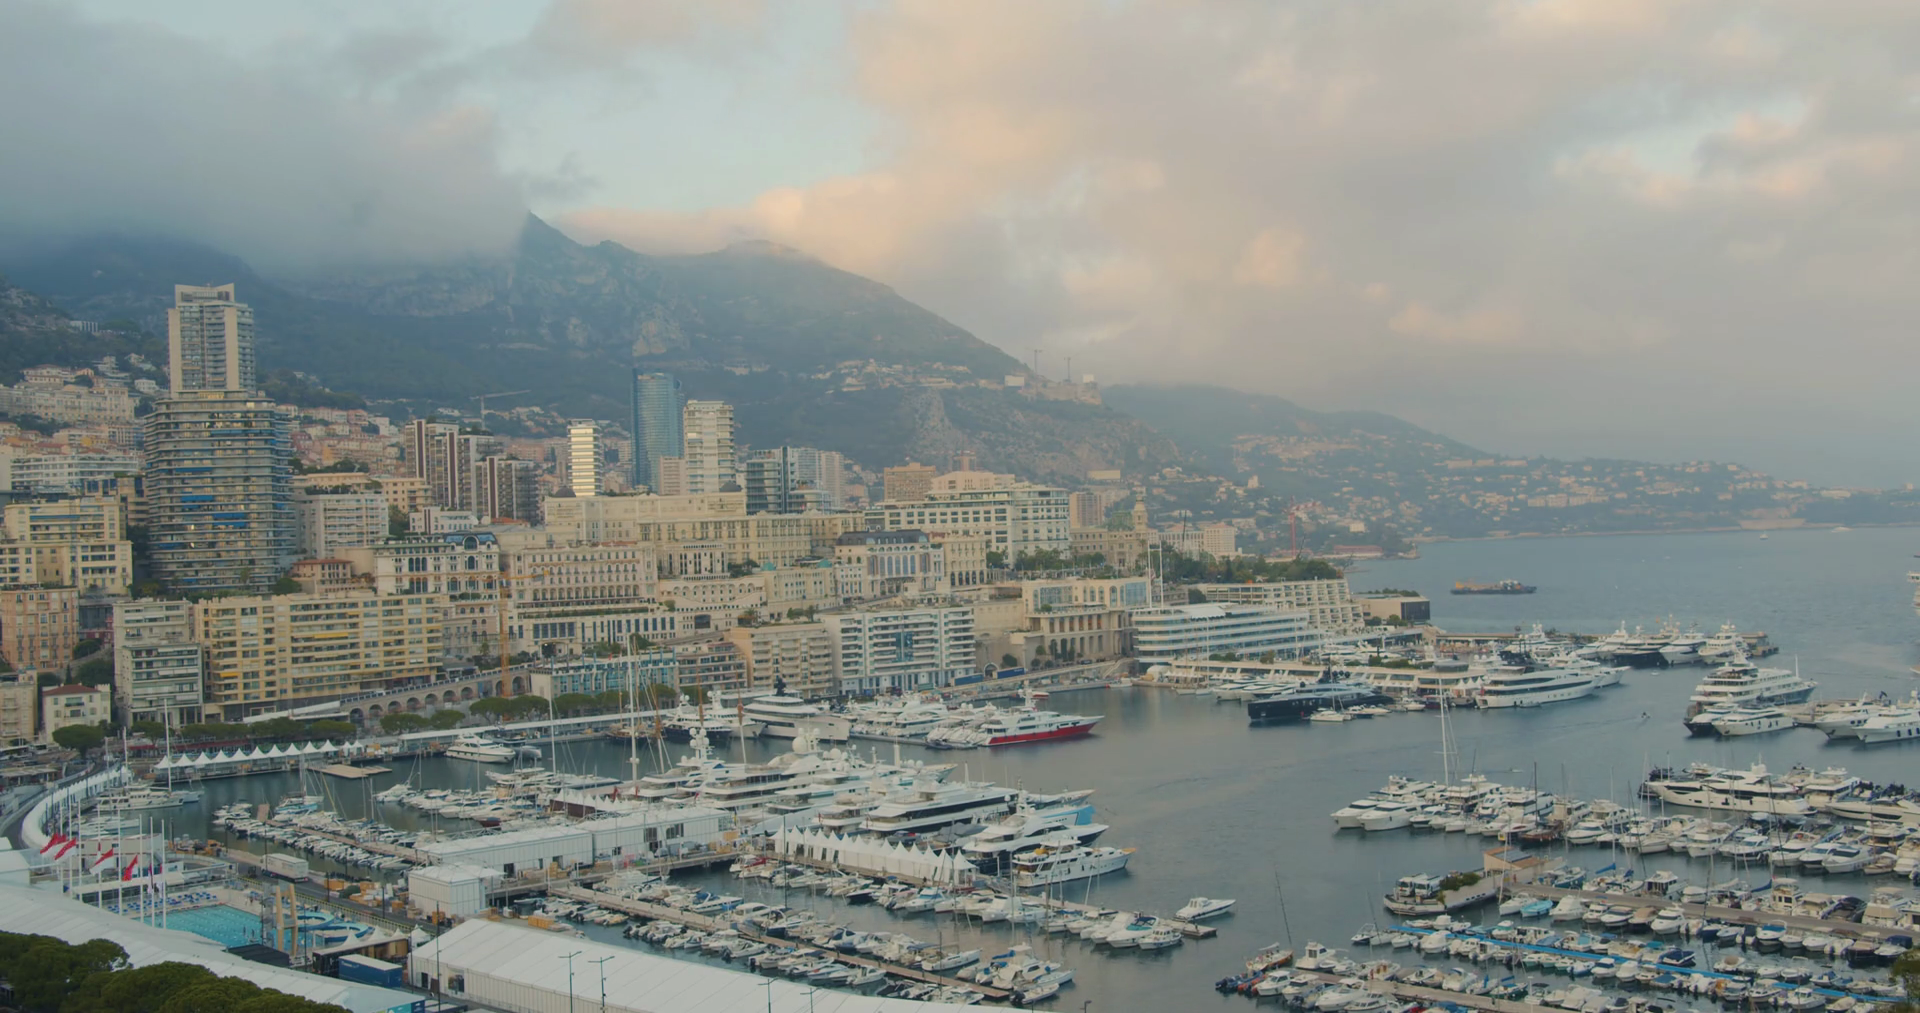 Monte Carlo city, timelapse. View of luxury yachts, boats and historic buildings in harbor of Monaco. Stock Video Footage